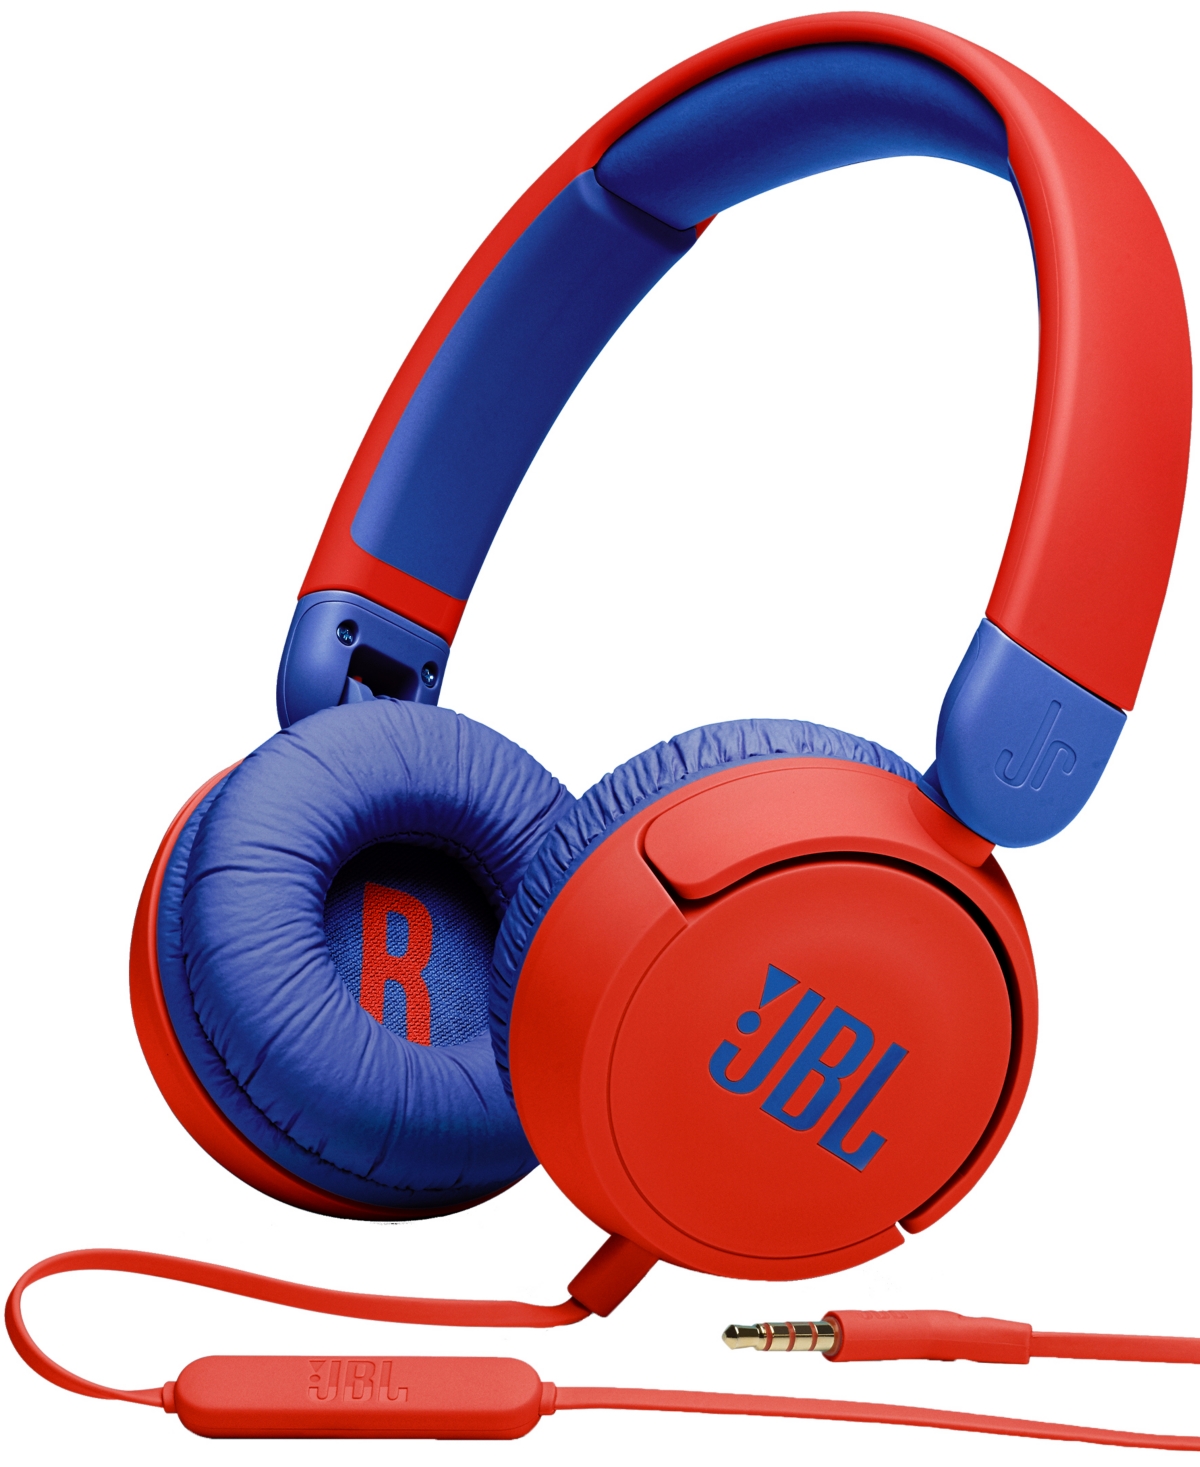 Jbl Jr 310 Youth On Ear Wired Headphones In Red